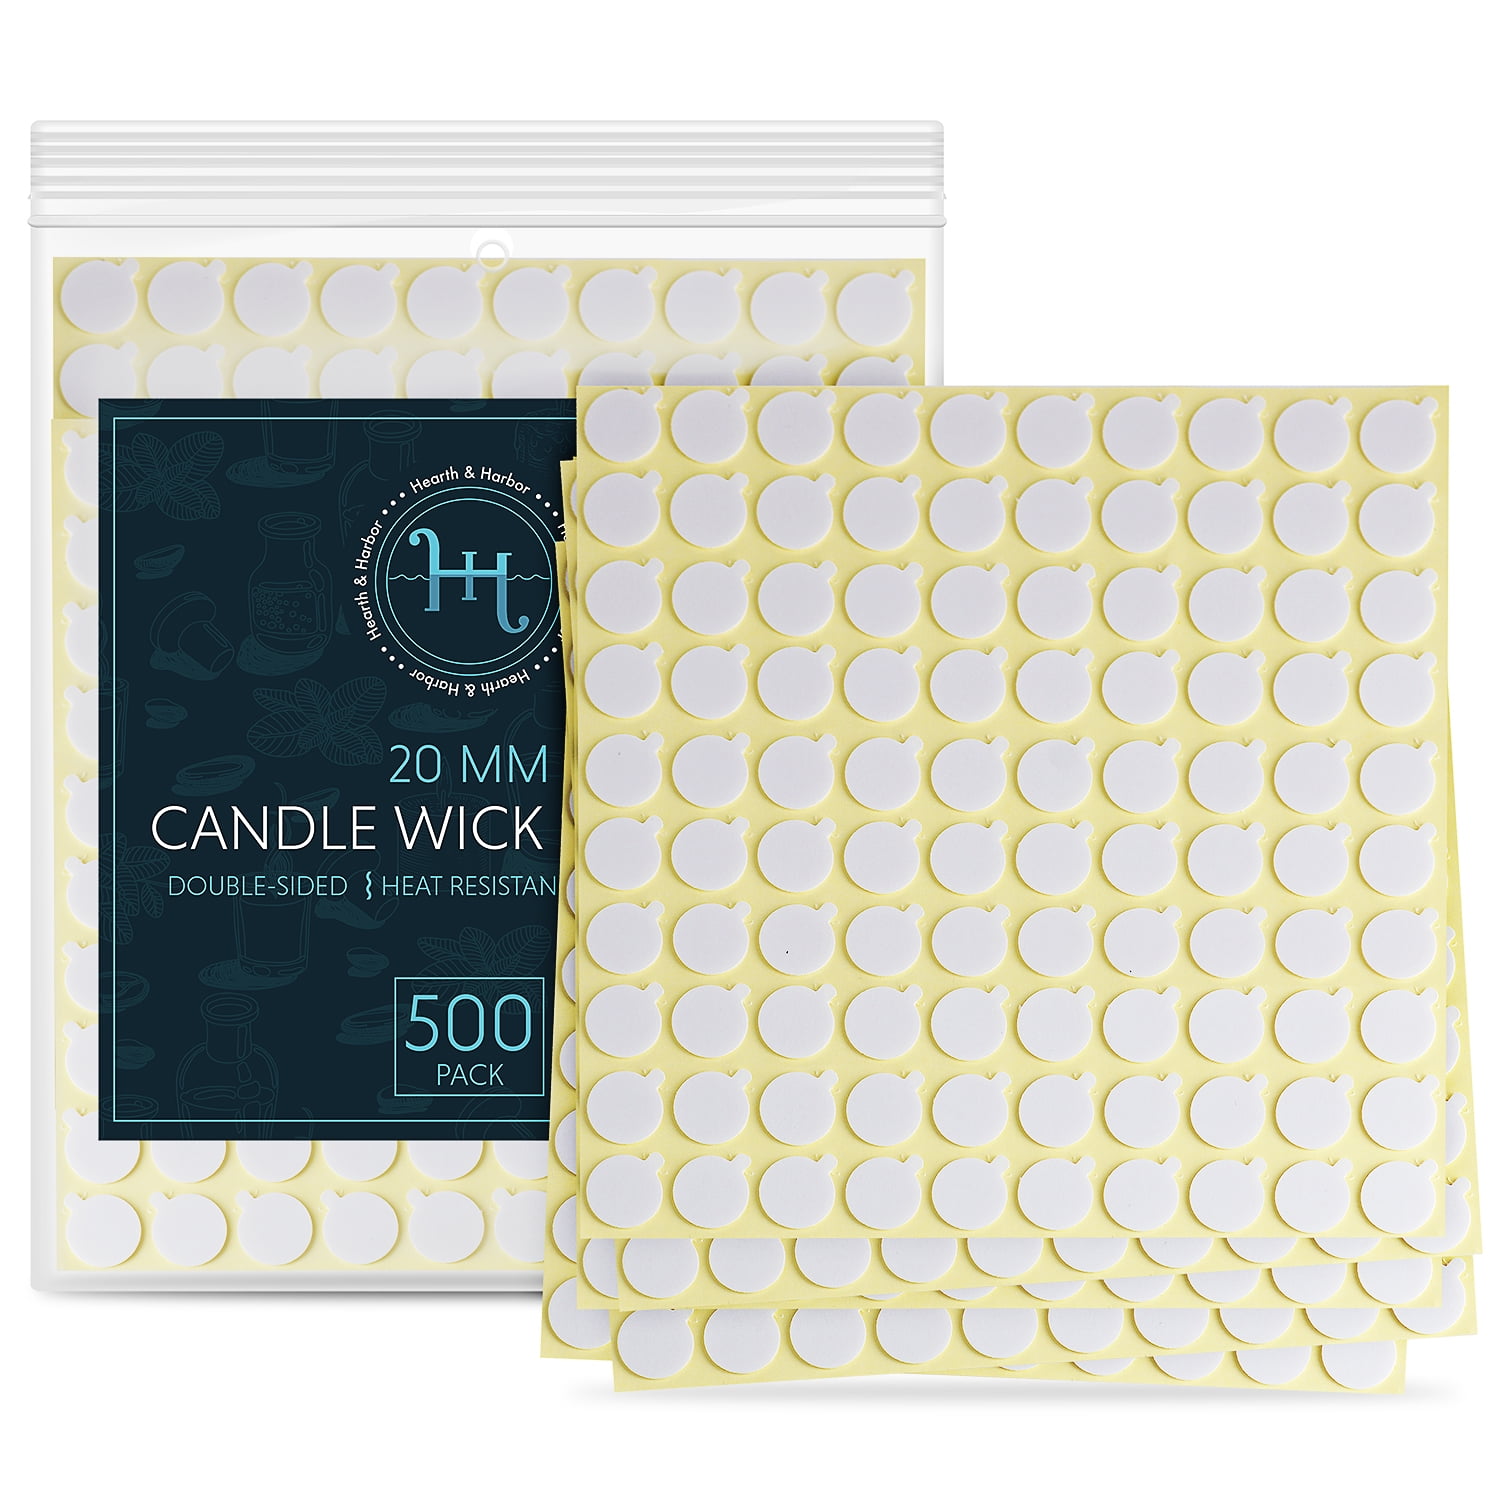 WICKS & STICKERS 50 ct LX Cotton Pretabbed 6 " Candle Wicks & 50 Wick Stickers